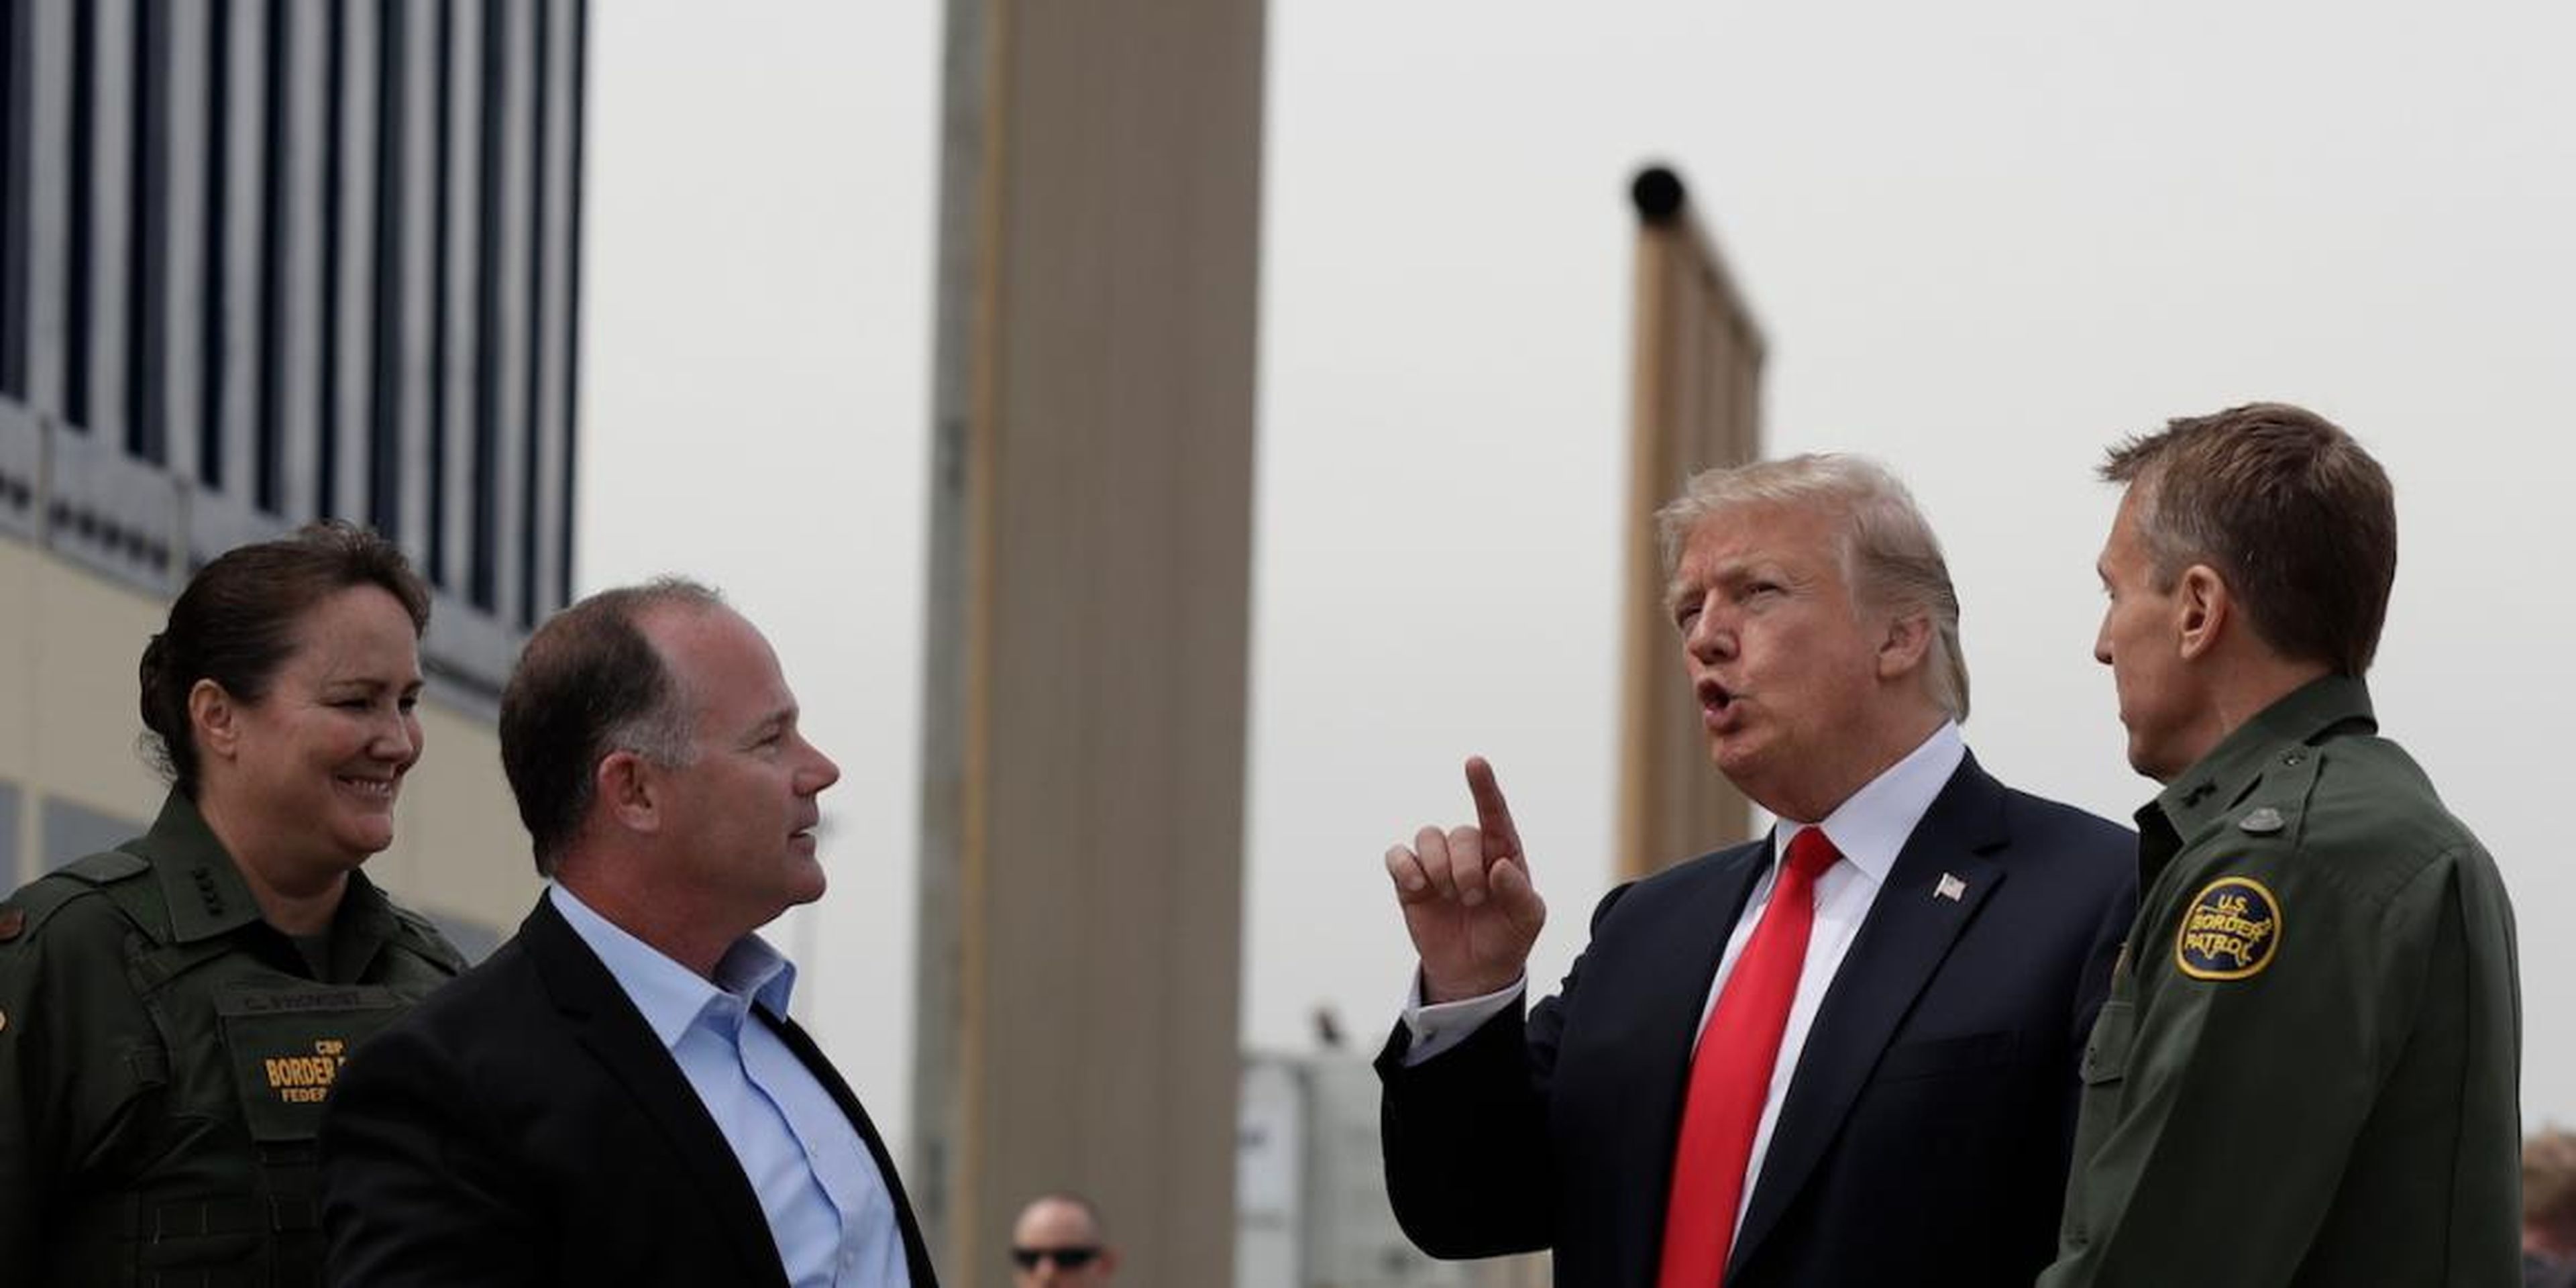 President Donald Trump reviews border wall prototypes in San Diego in March 2018. He has been "micromanaging" plans for his border wall "down to the smallest design details," The Washington Post reported.